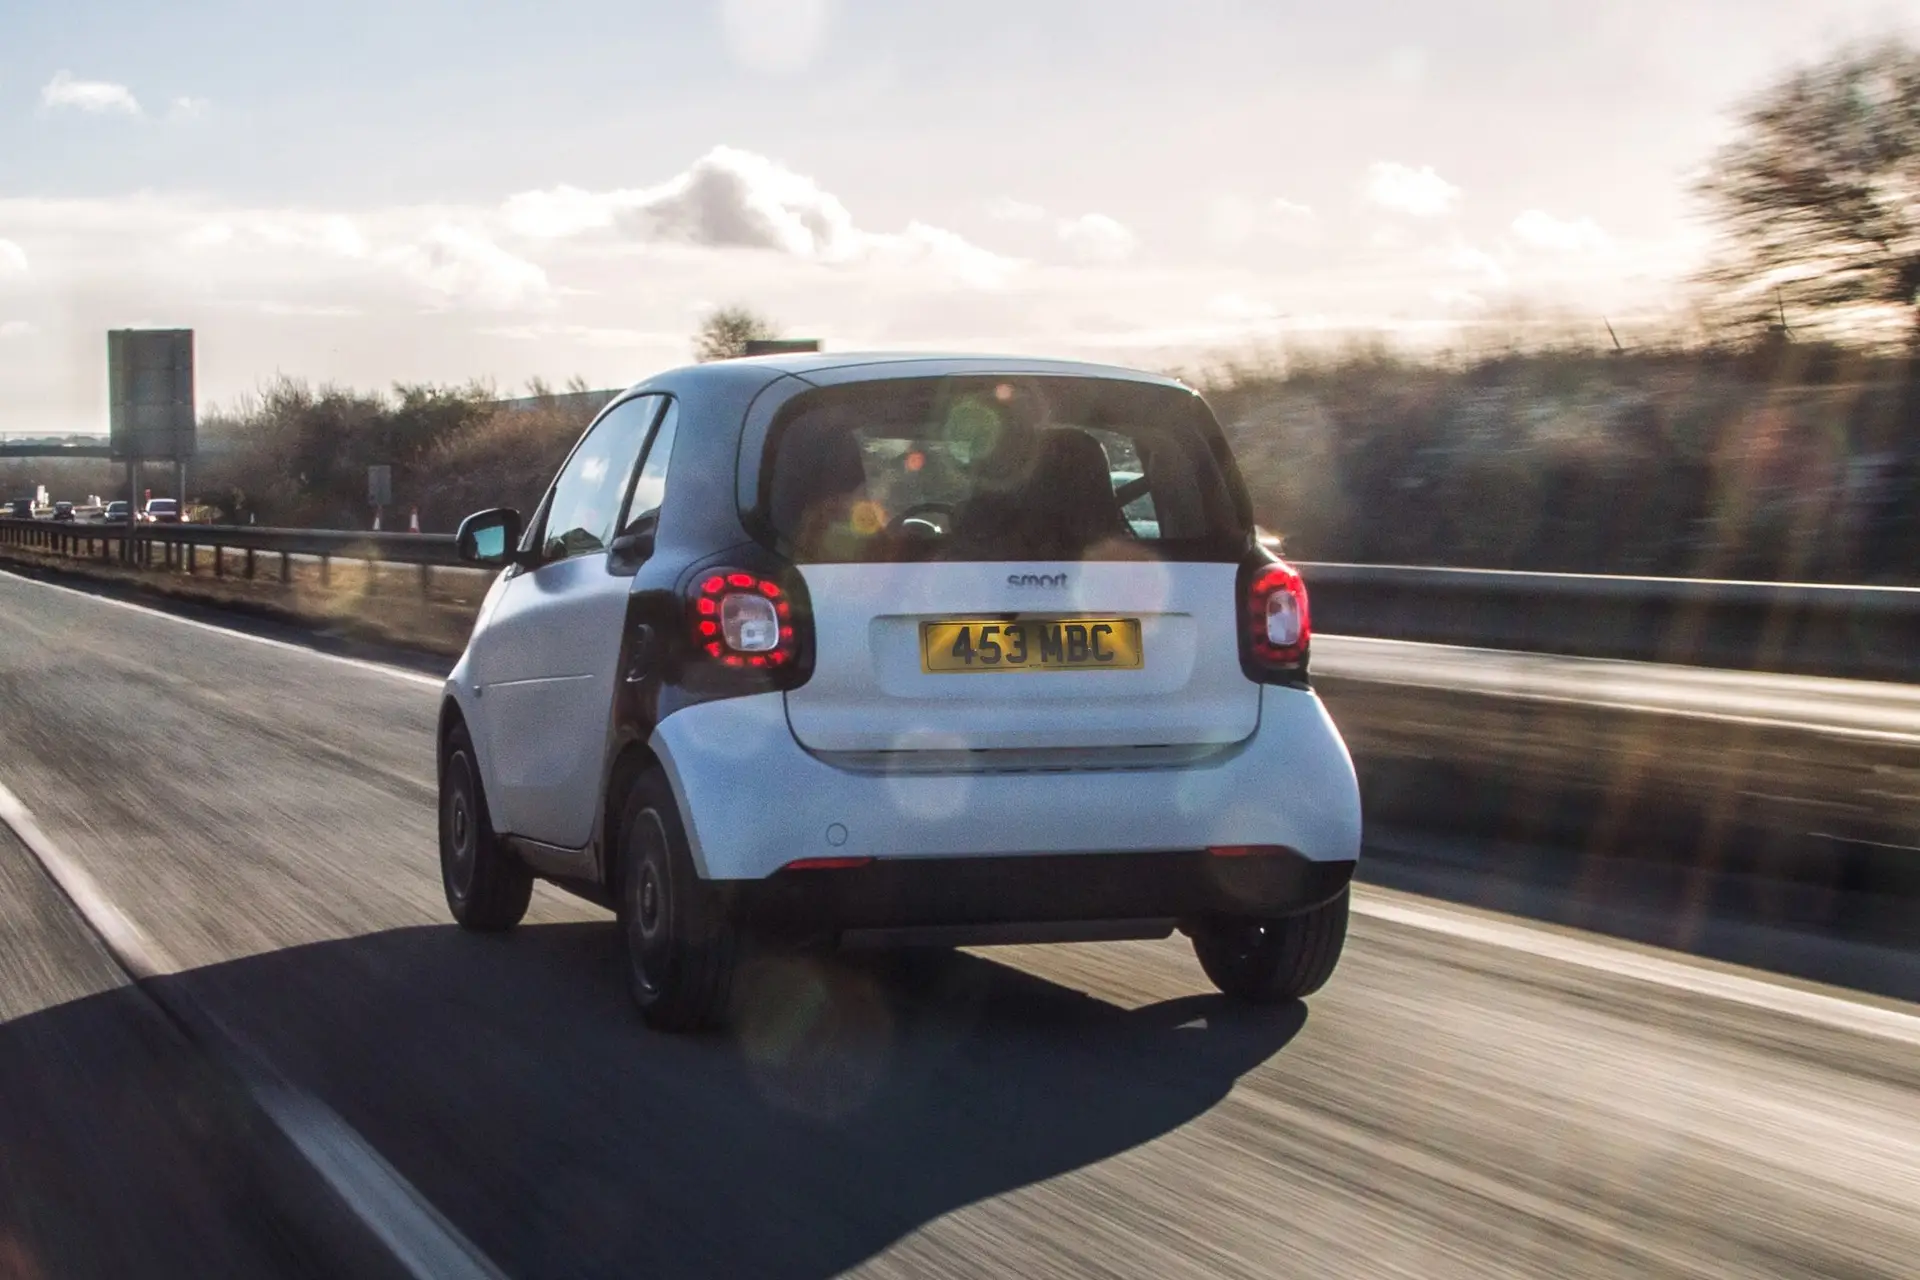 Smart Fortwo Coupe (2014-2019) Review: exterior rear three quarter photo of the Smart Fortwo Coupe on the road